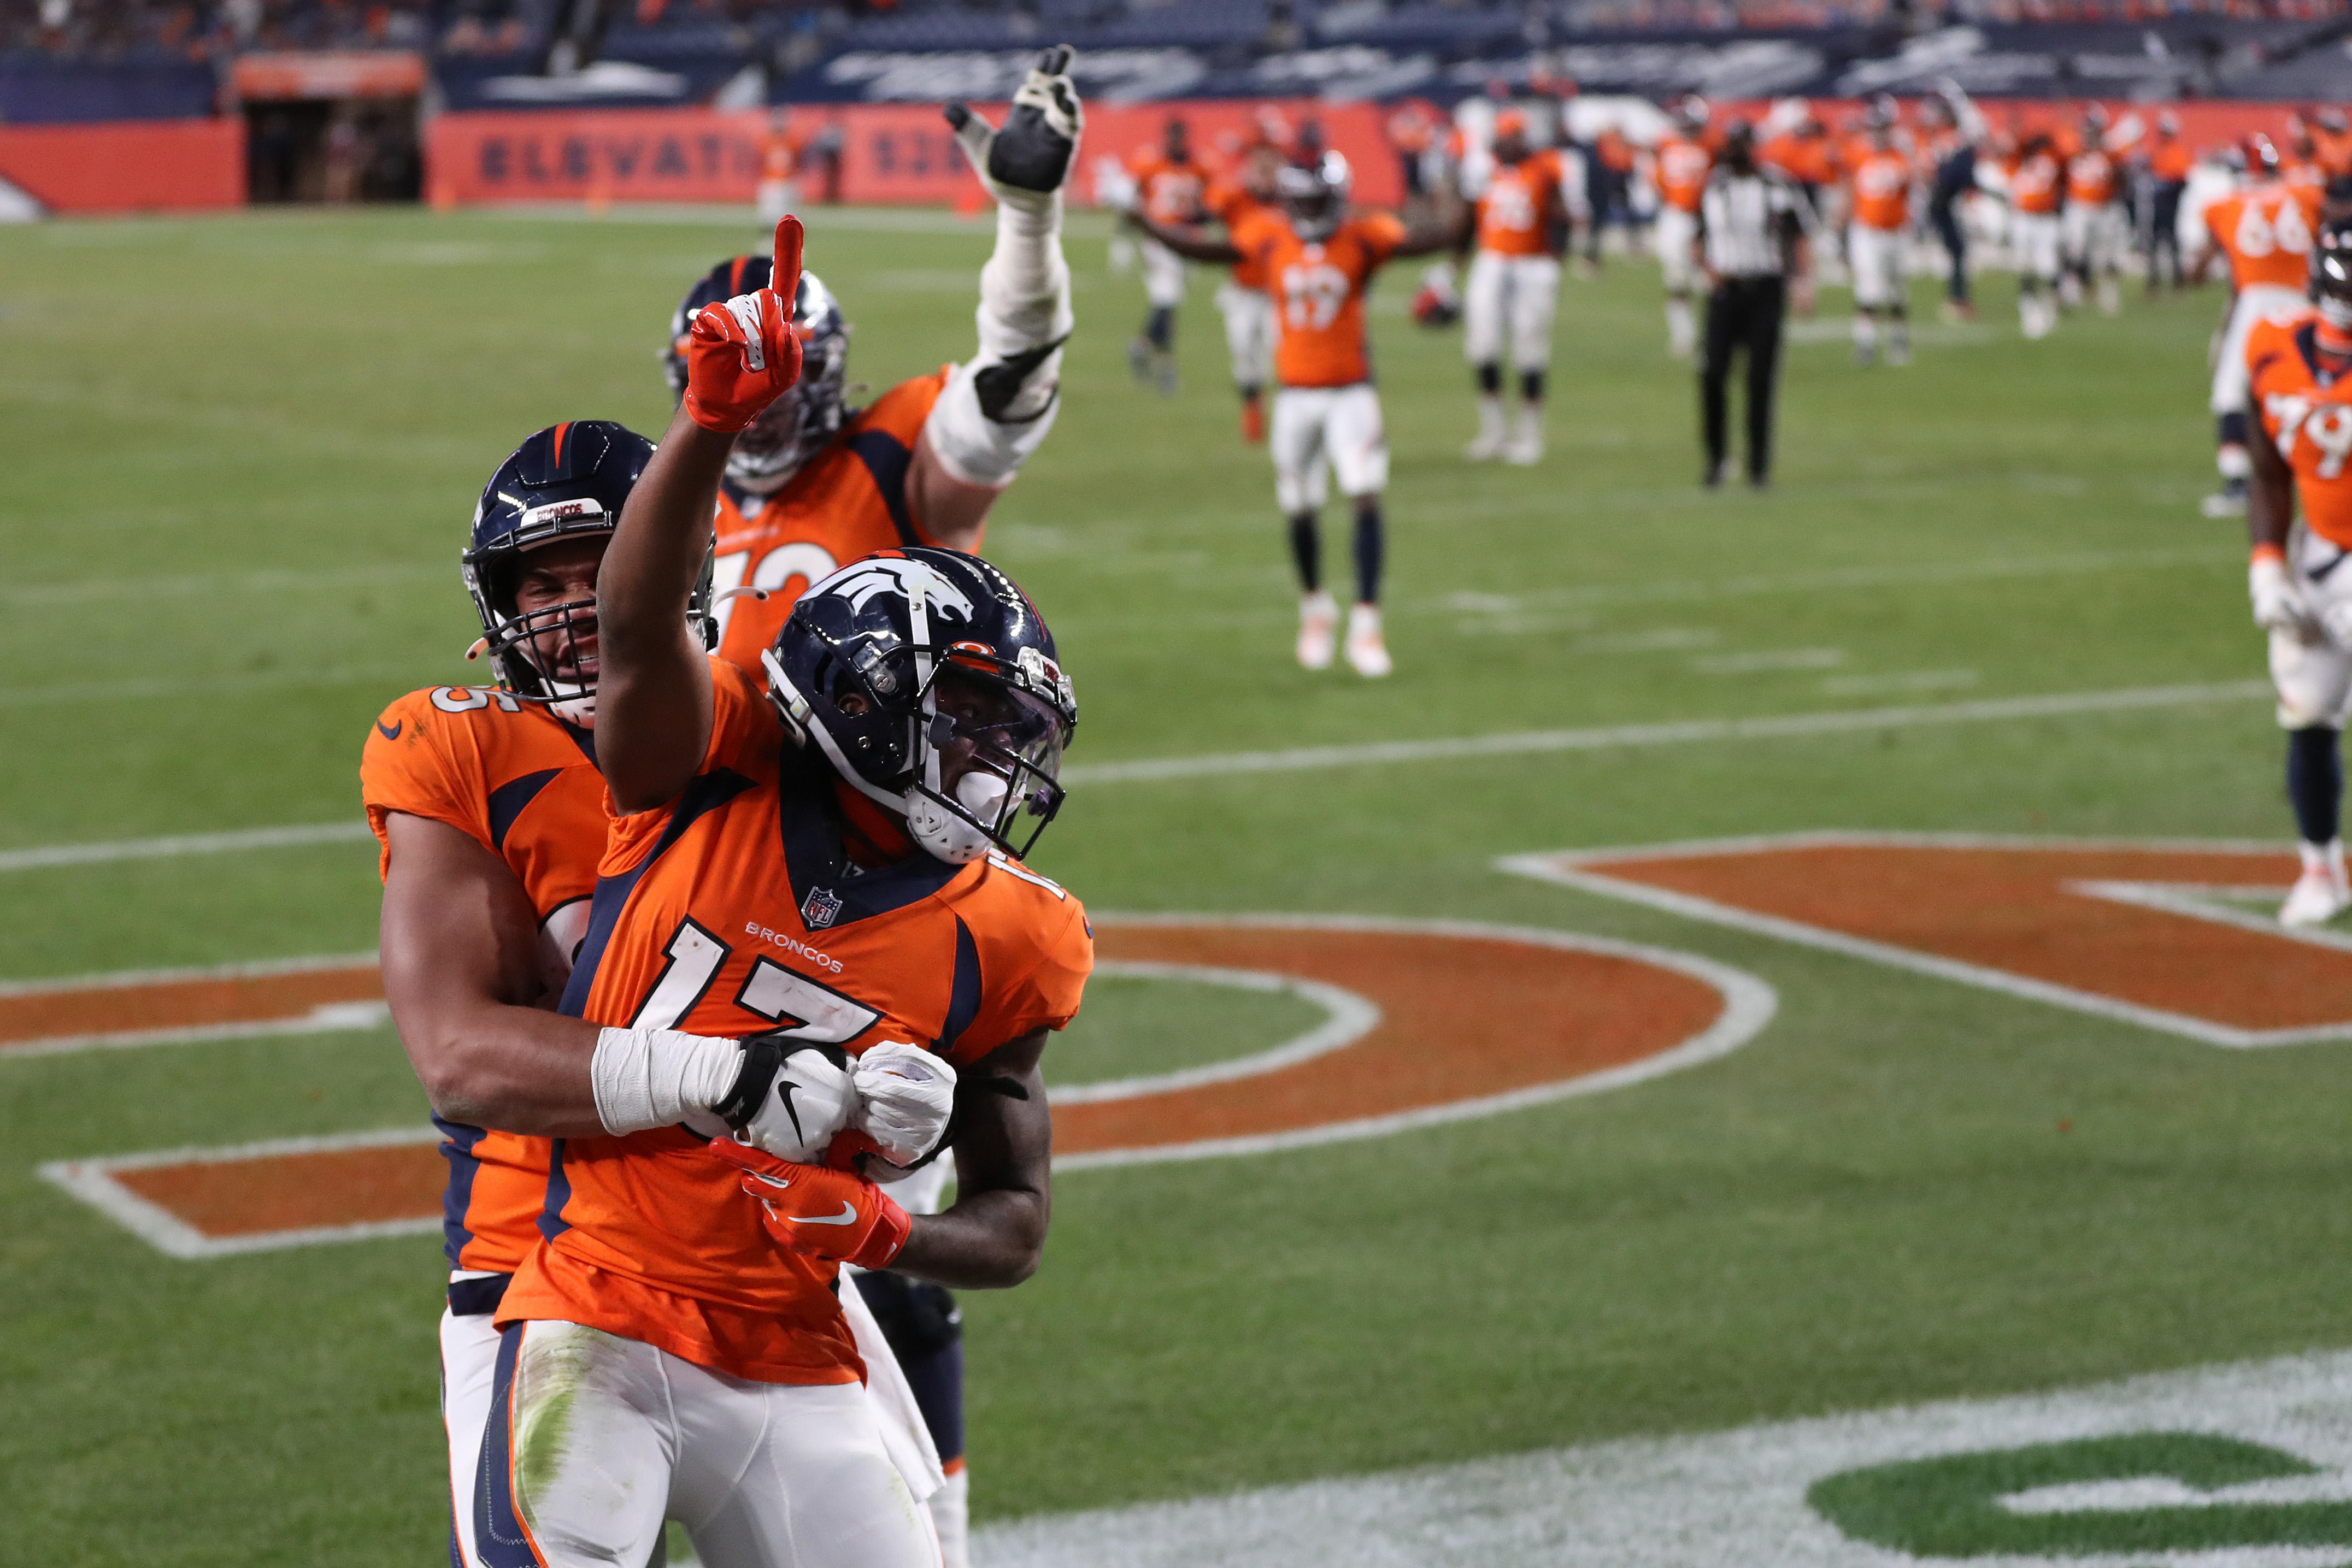 KJ Hamler of the Denver Broncos celebrates after scoring a touchdown against the Los Angeles Chargers at the end of the fourth quarter of the game at Empower Field At Mile High on Nov. 1, 2020.